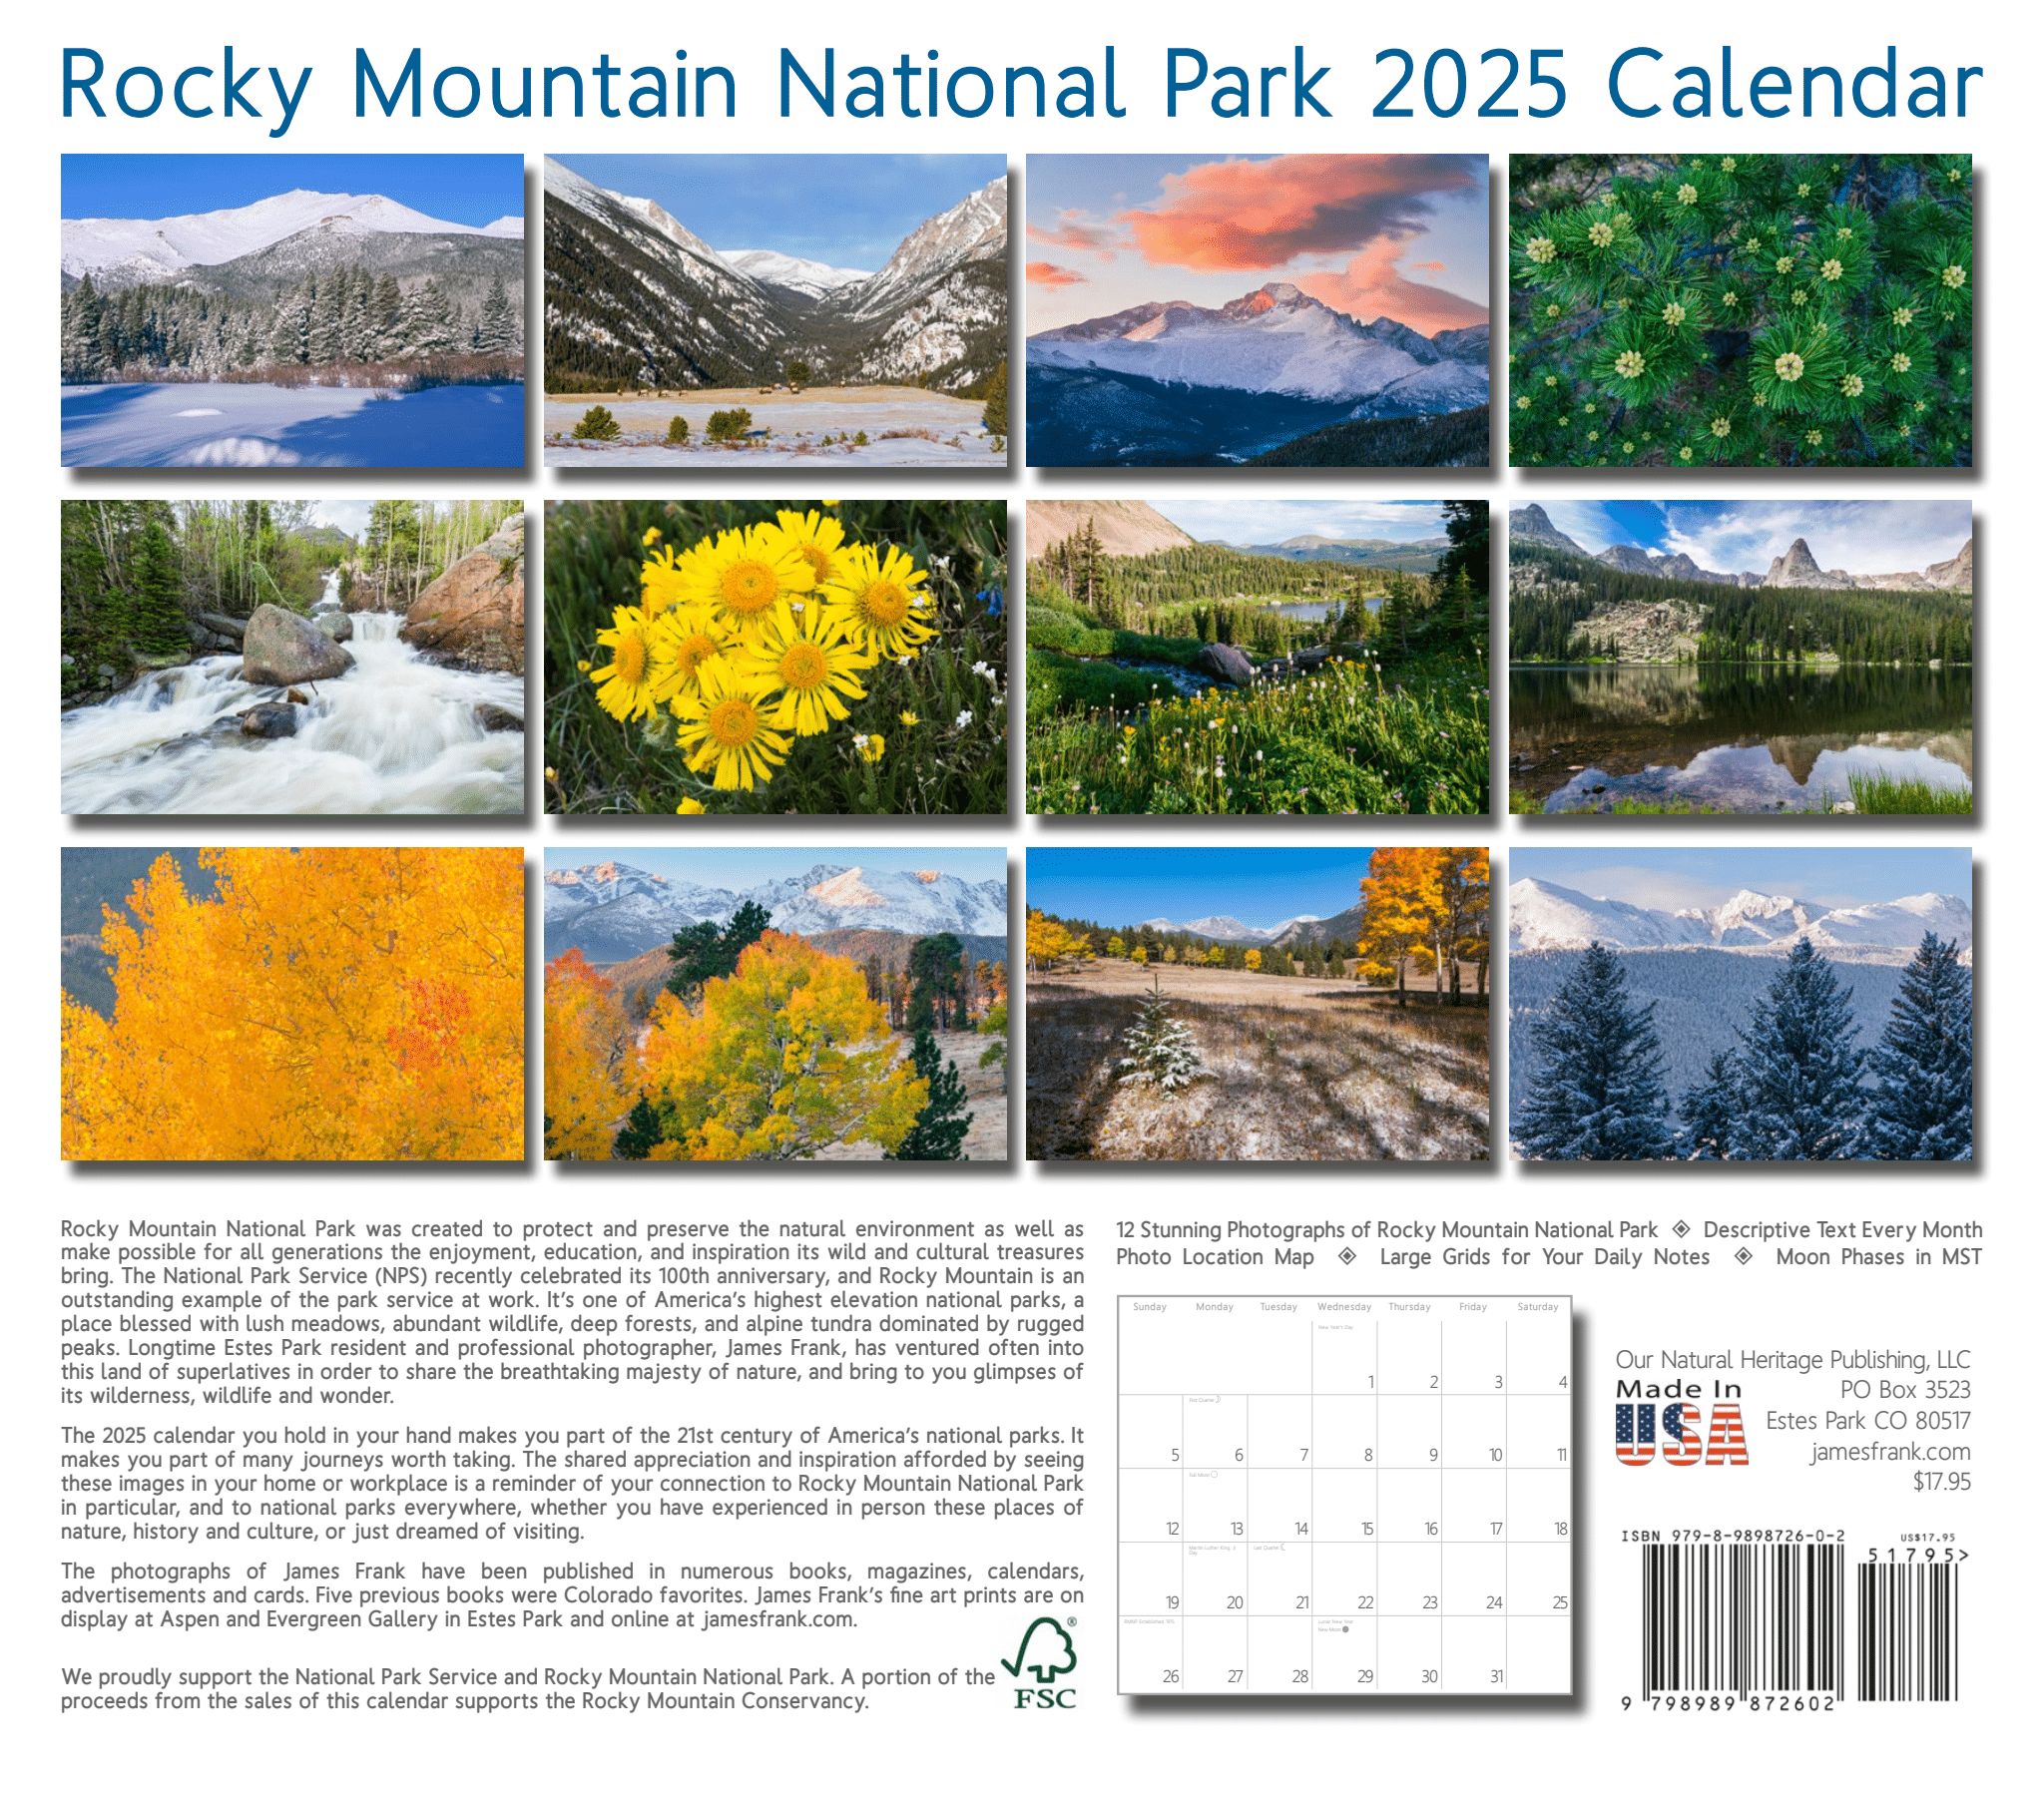 2025 James Frank Scenic RMNP Calendar featuring 12 scenic photographs of Rocky Mountain National Park. Each month showcases a different landscape. Produced by National Heritage Publishing. Printed in the USA.